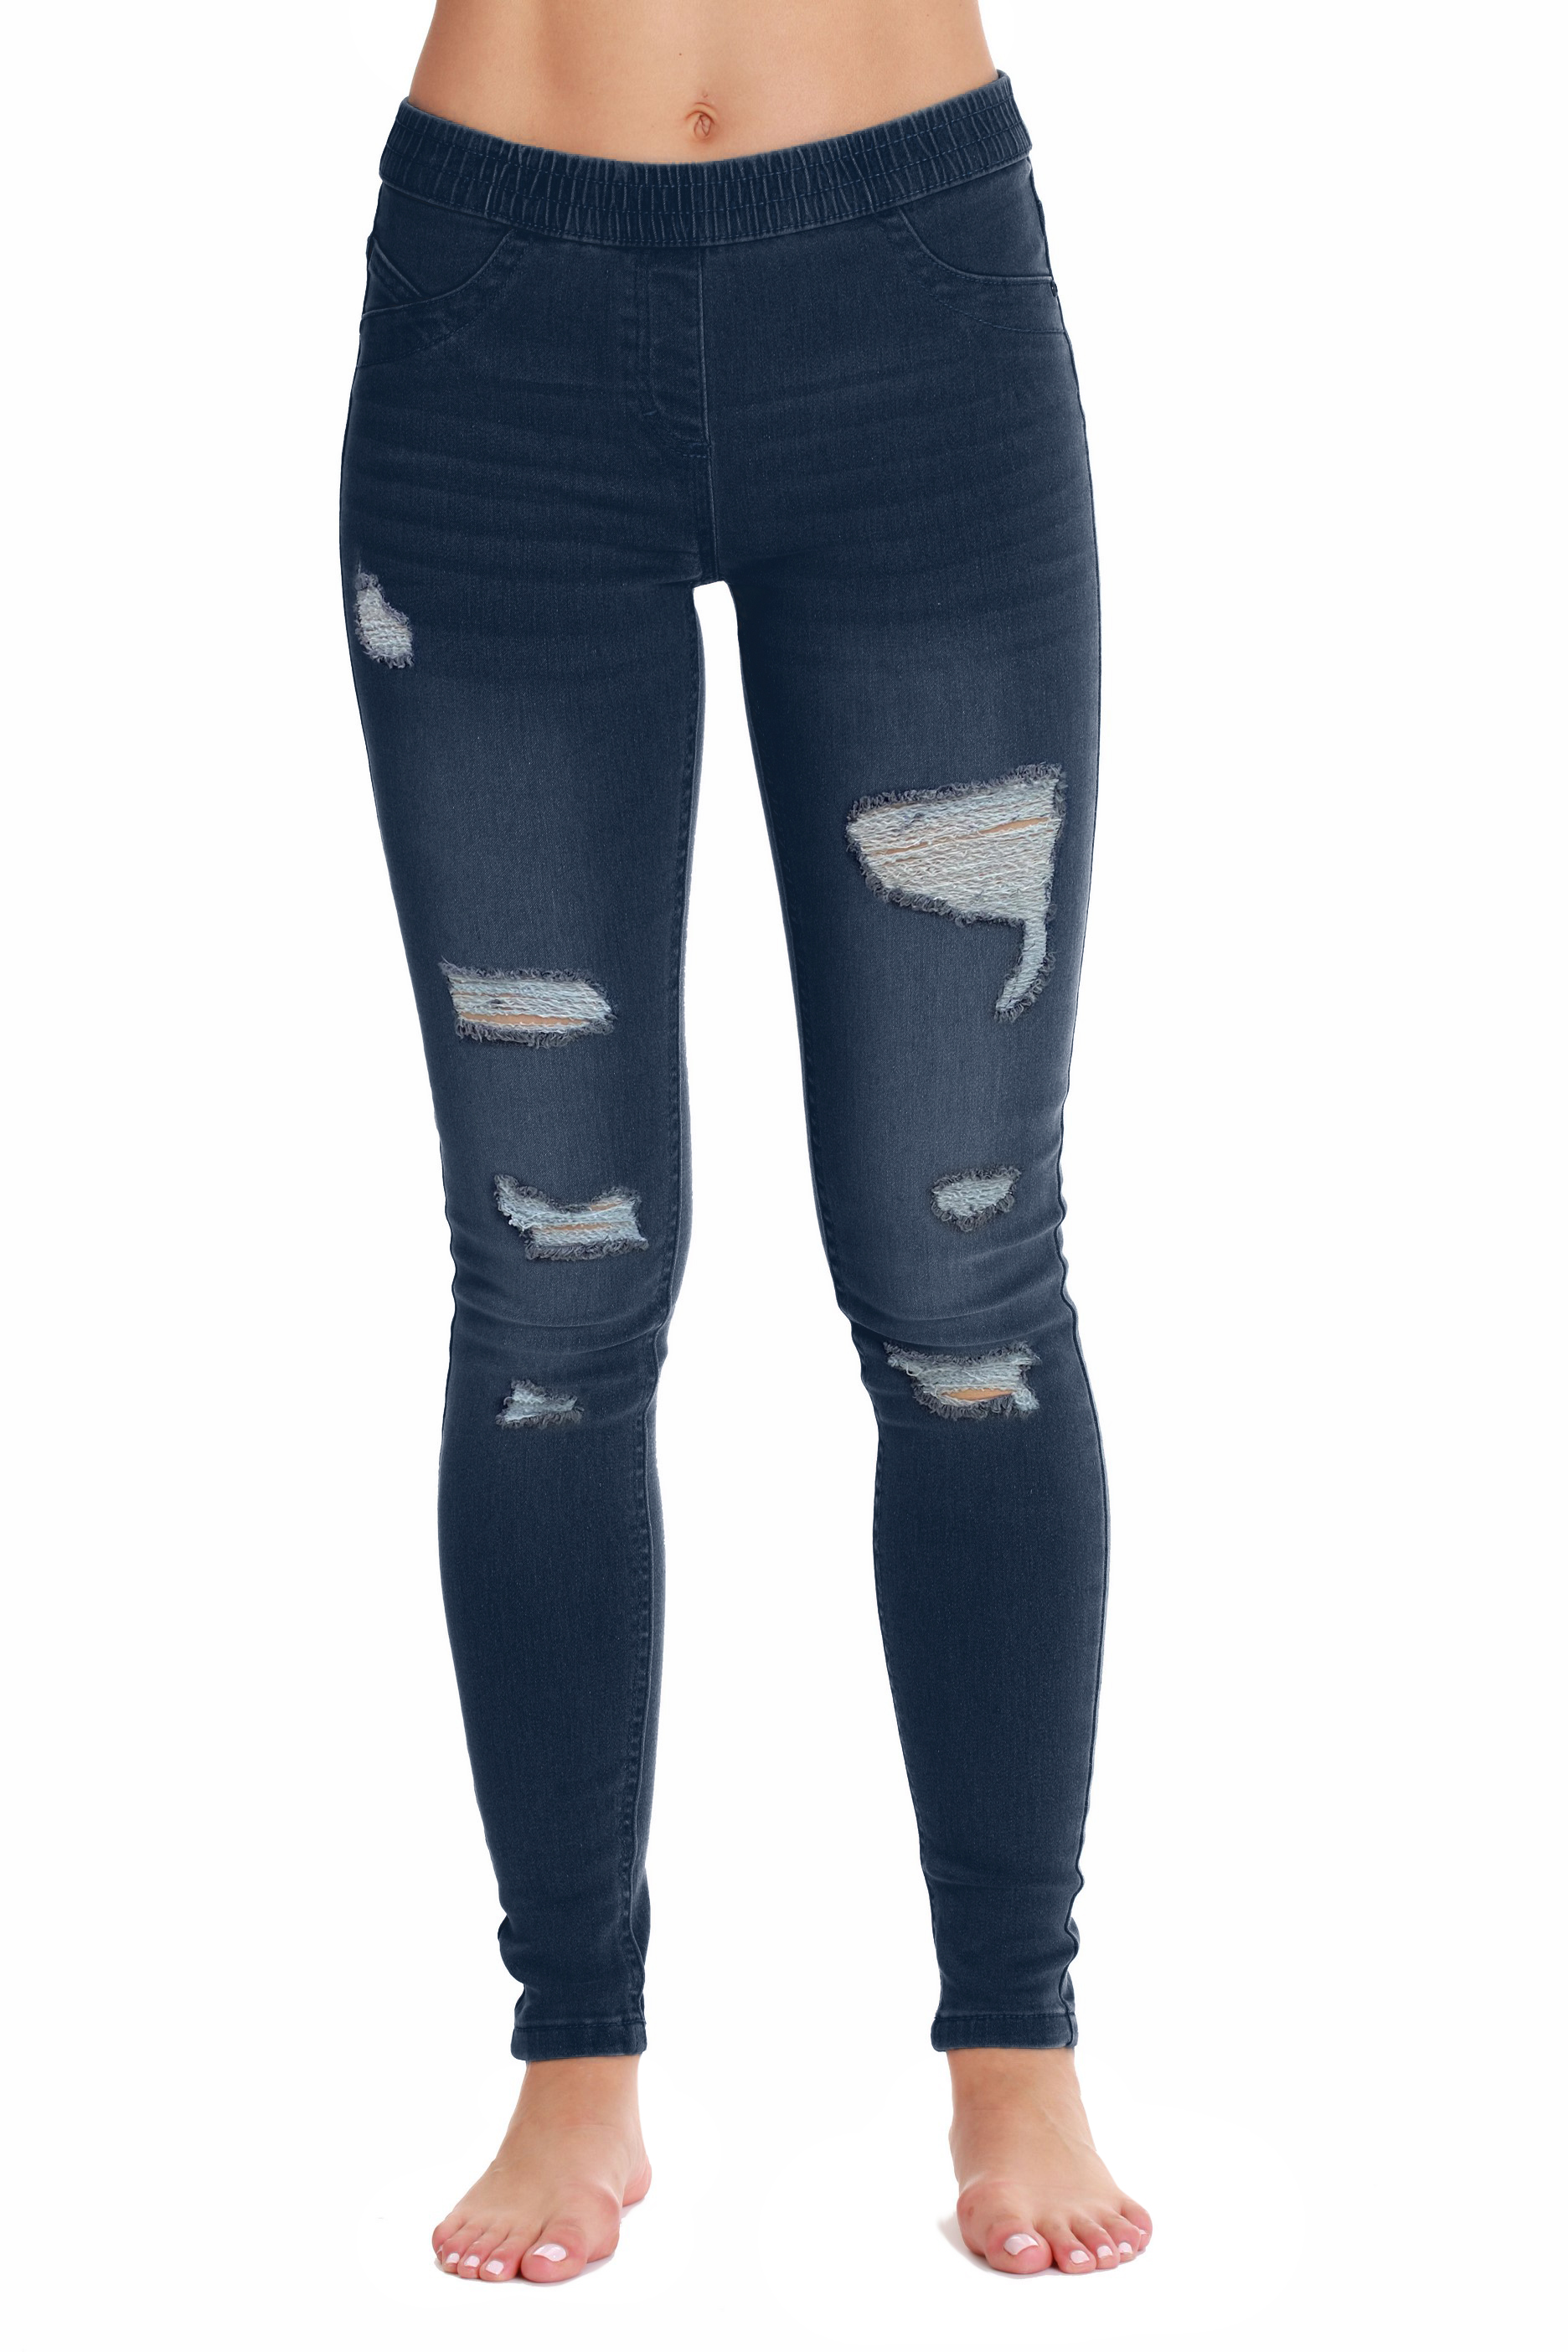 Just Love Denim Wash Ripped Jeggings for Women - Helia Beer Co